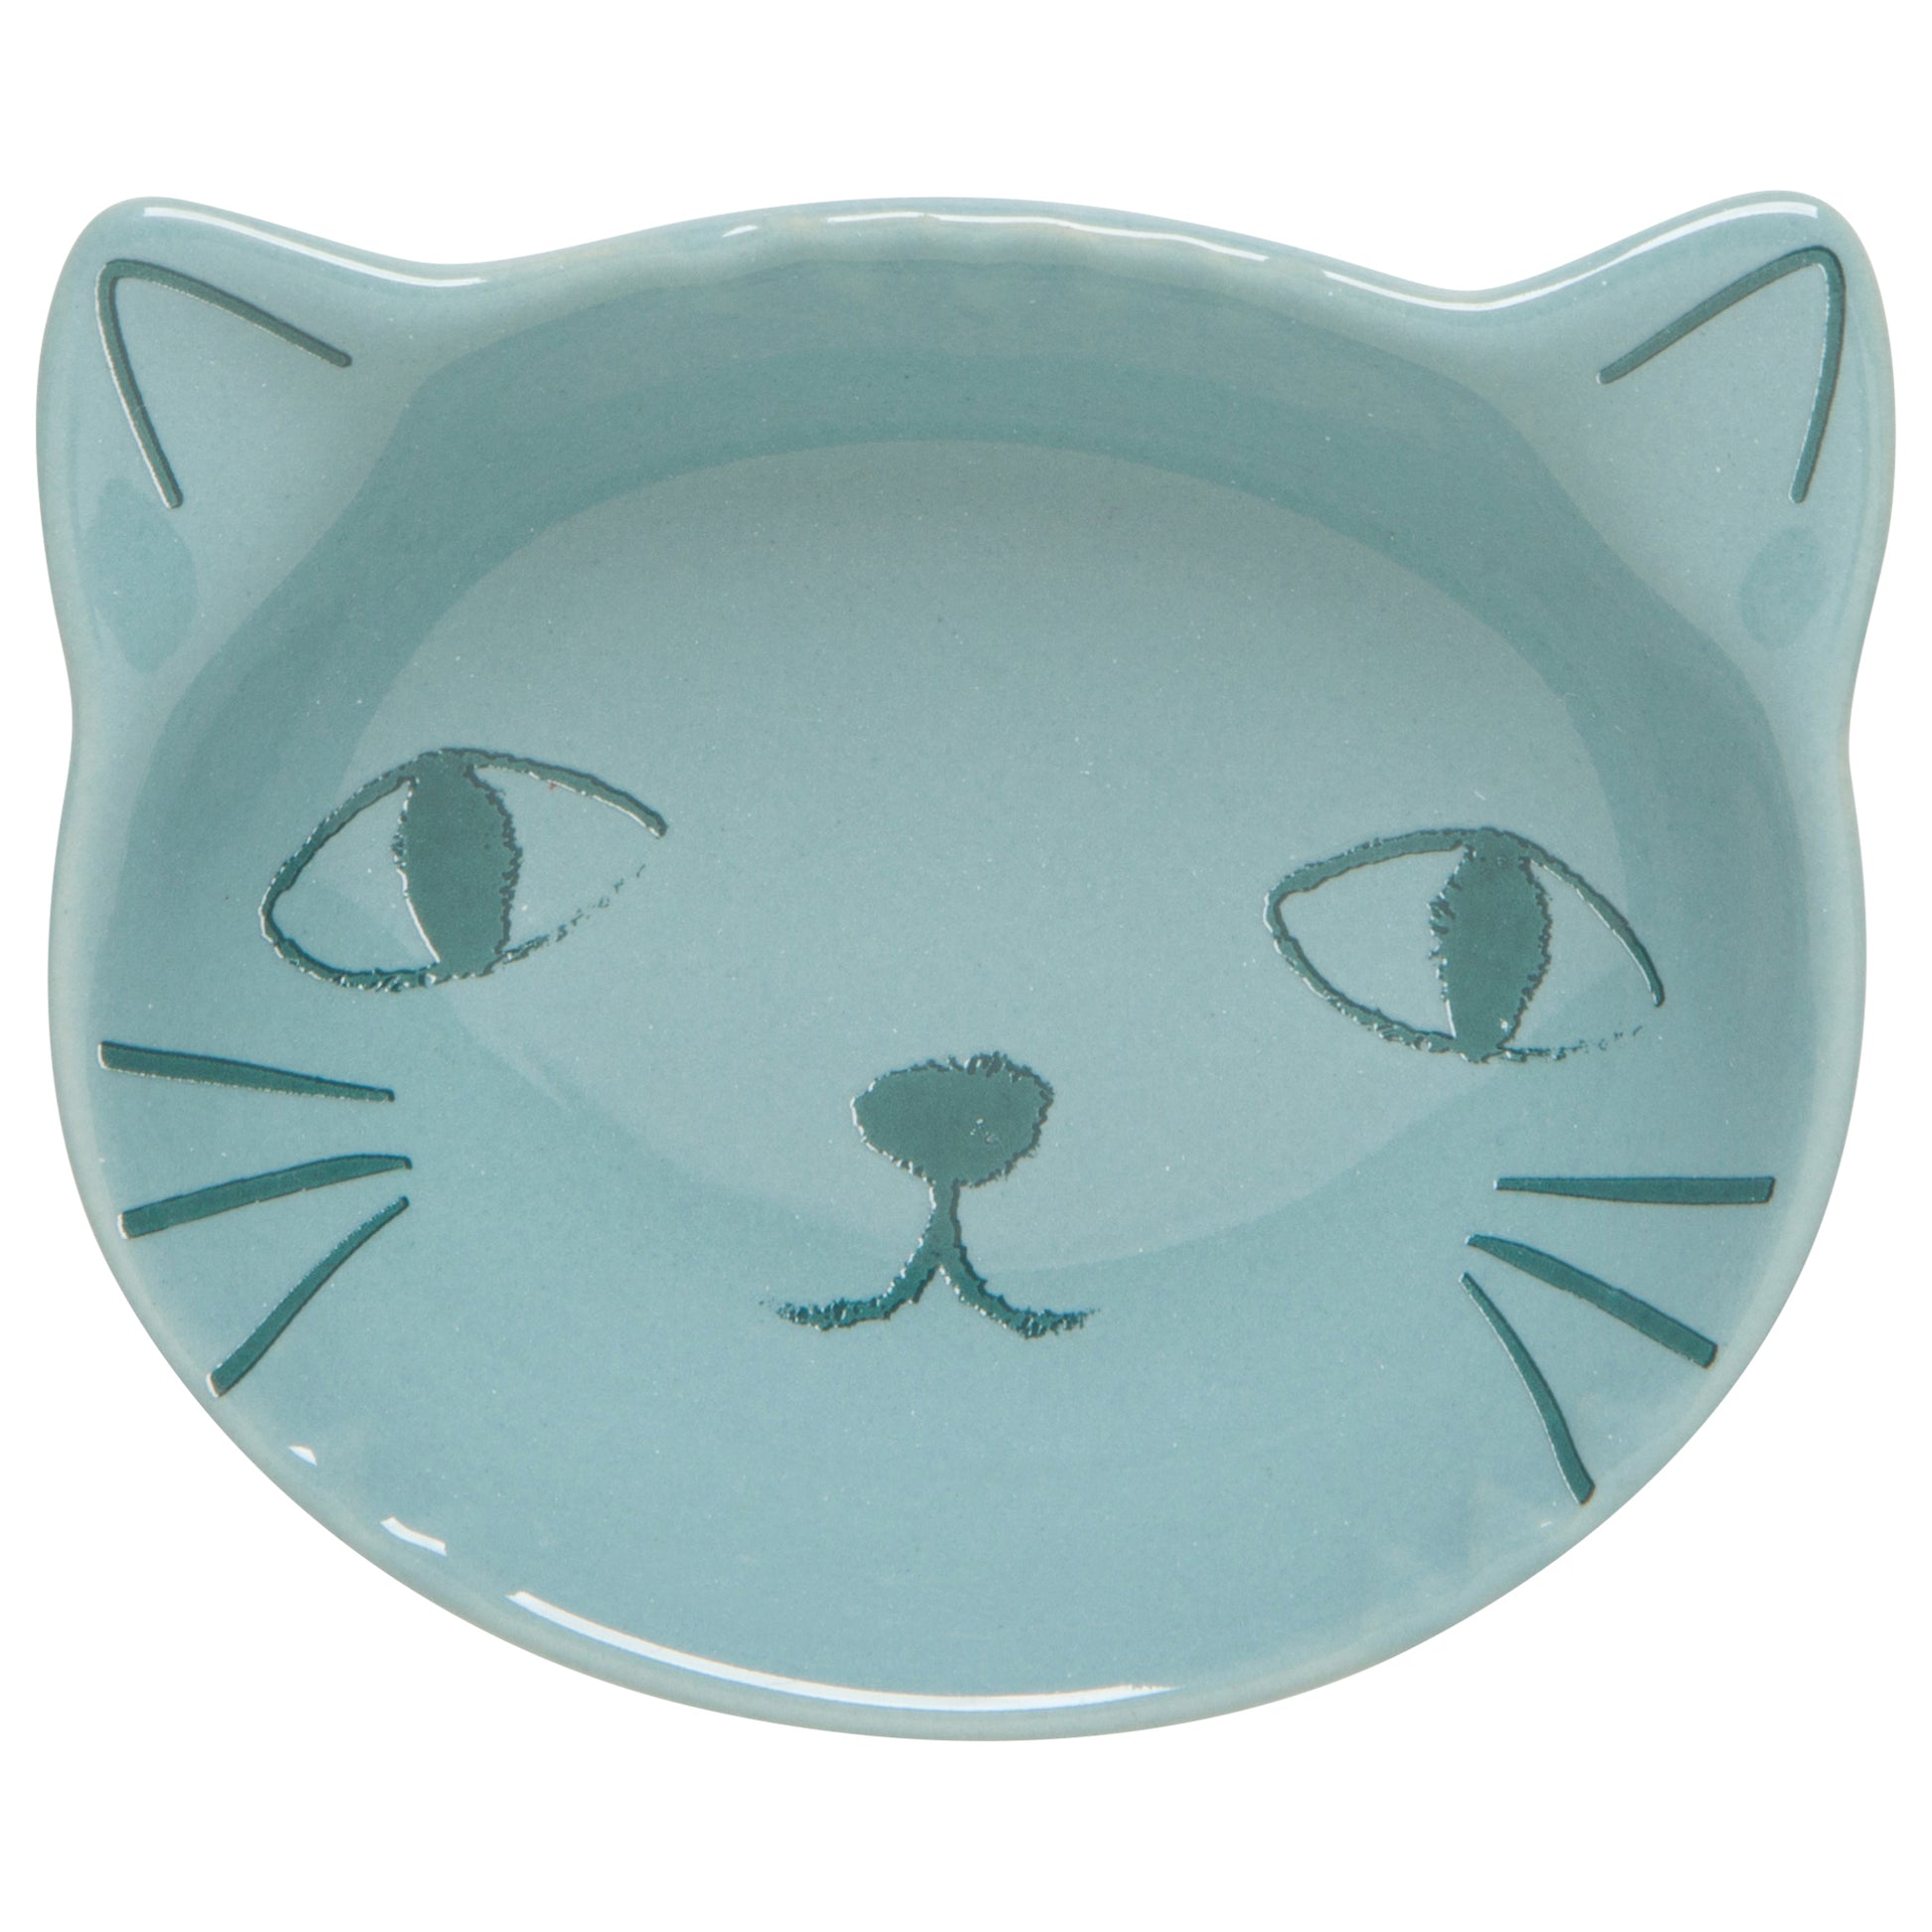 "The Cats Meow": Pinch Bowls (Set of 6) - Tiny Tiger Gift Shop